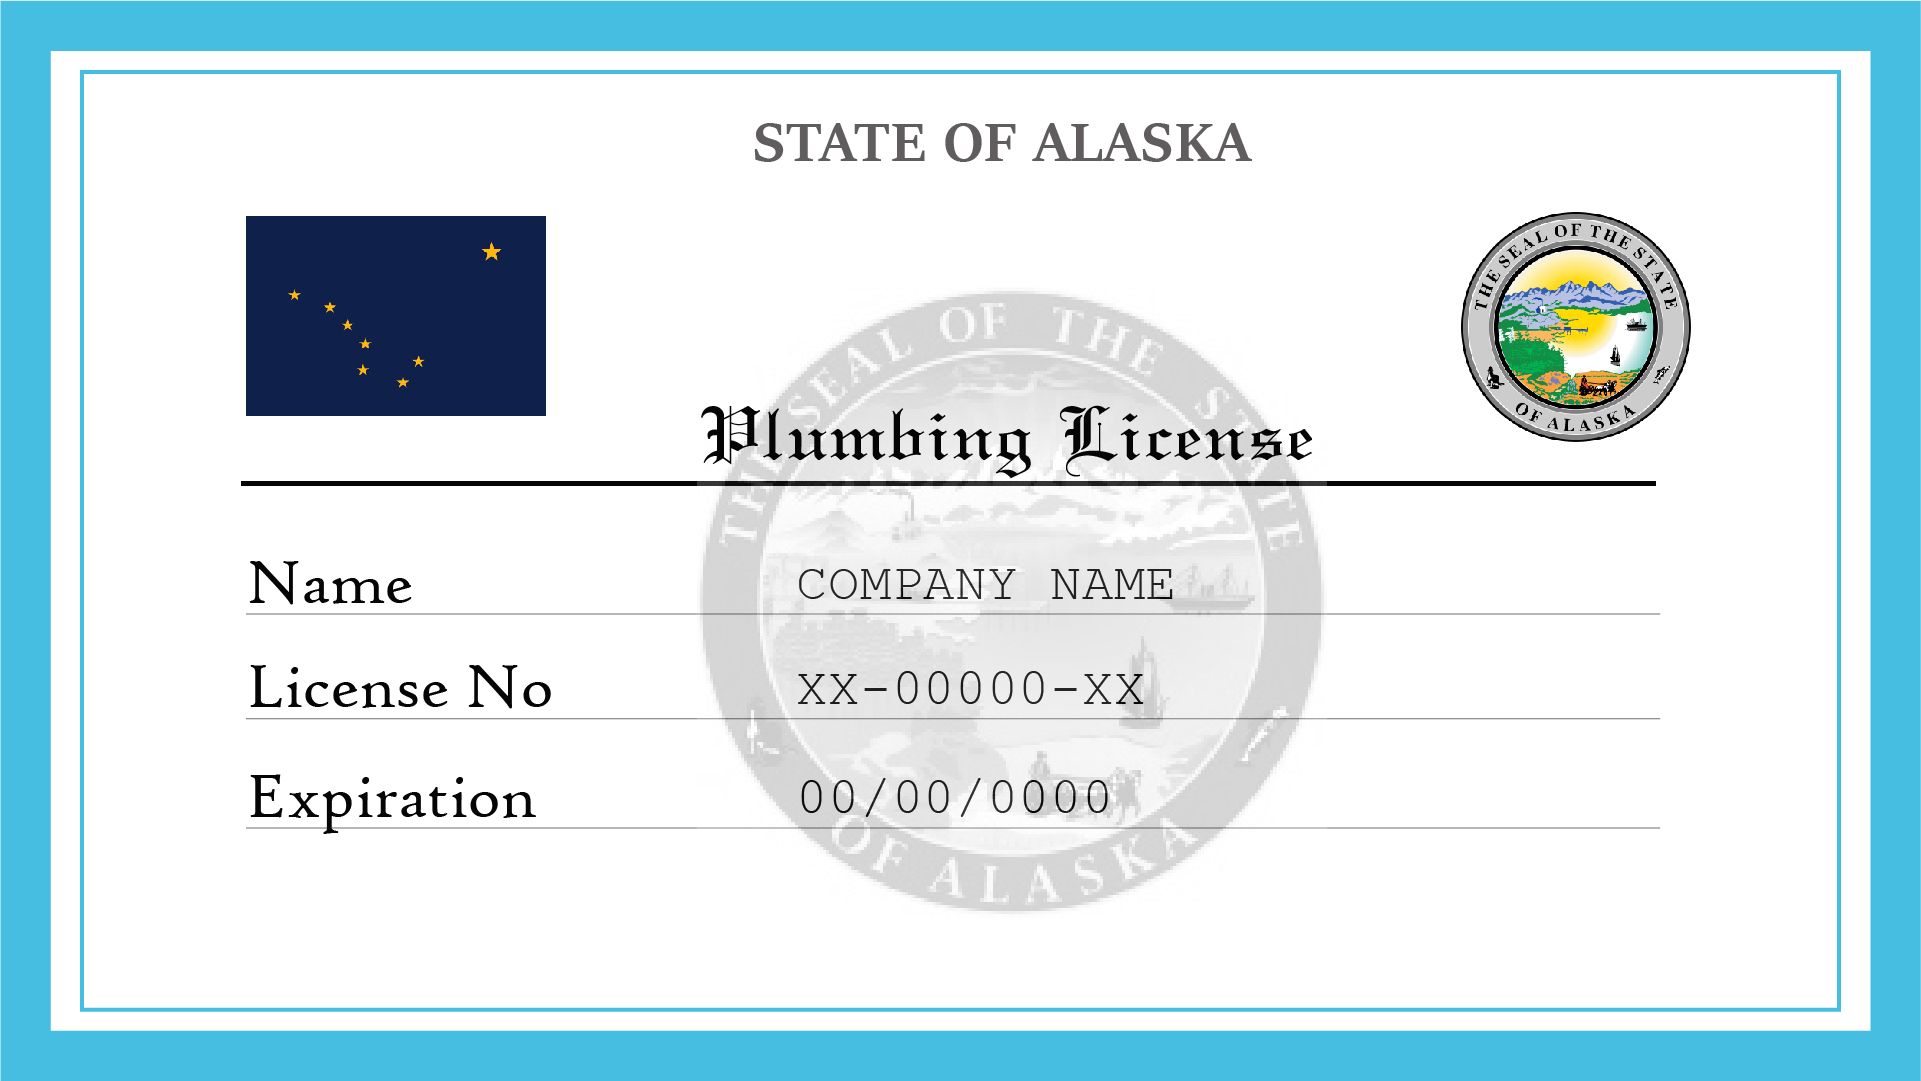 Alaska plumber installer license prep class download the new version for iphone